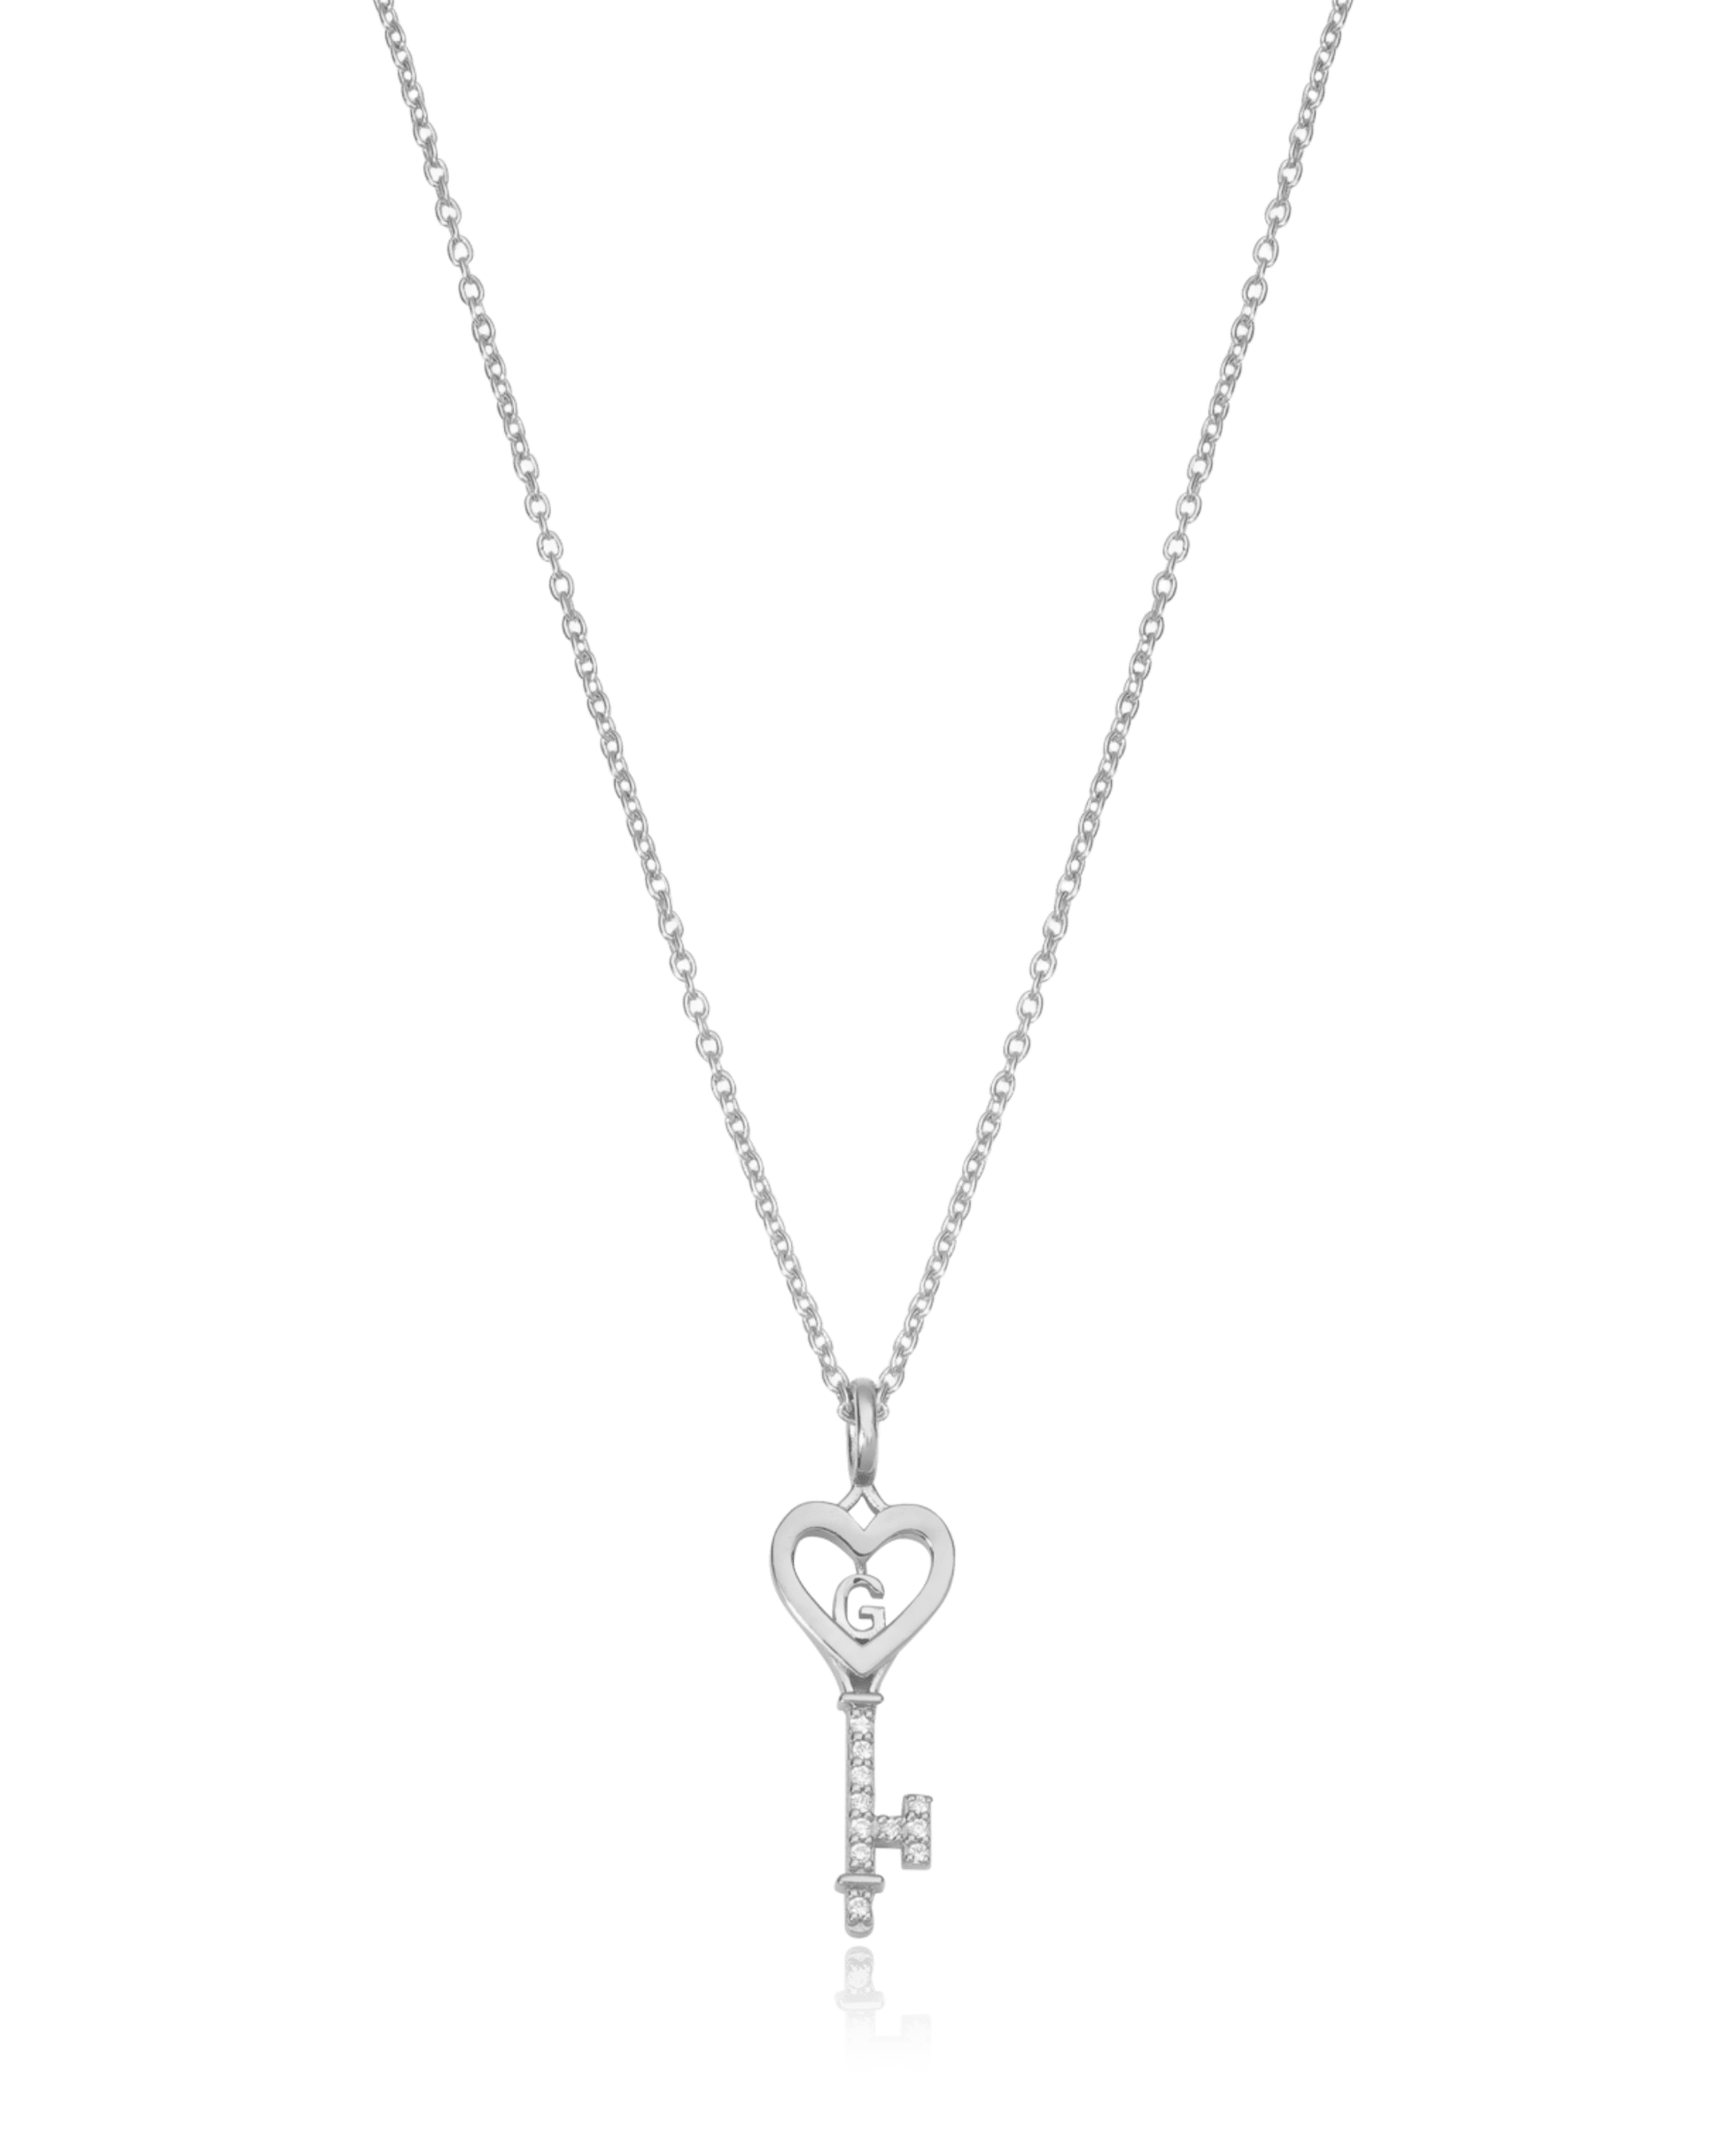 Key To My Heart Necklace with Diamond - 925 Sterling Silver Necklaces magal-dev 